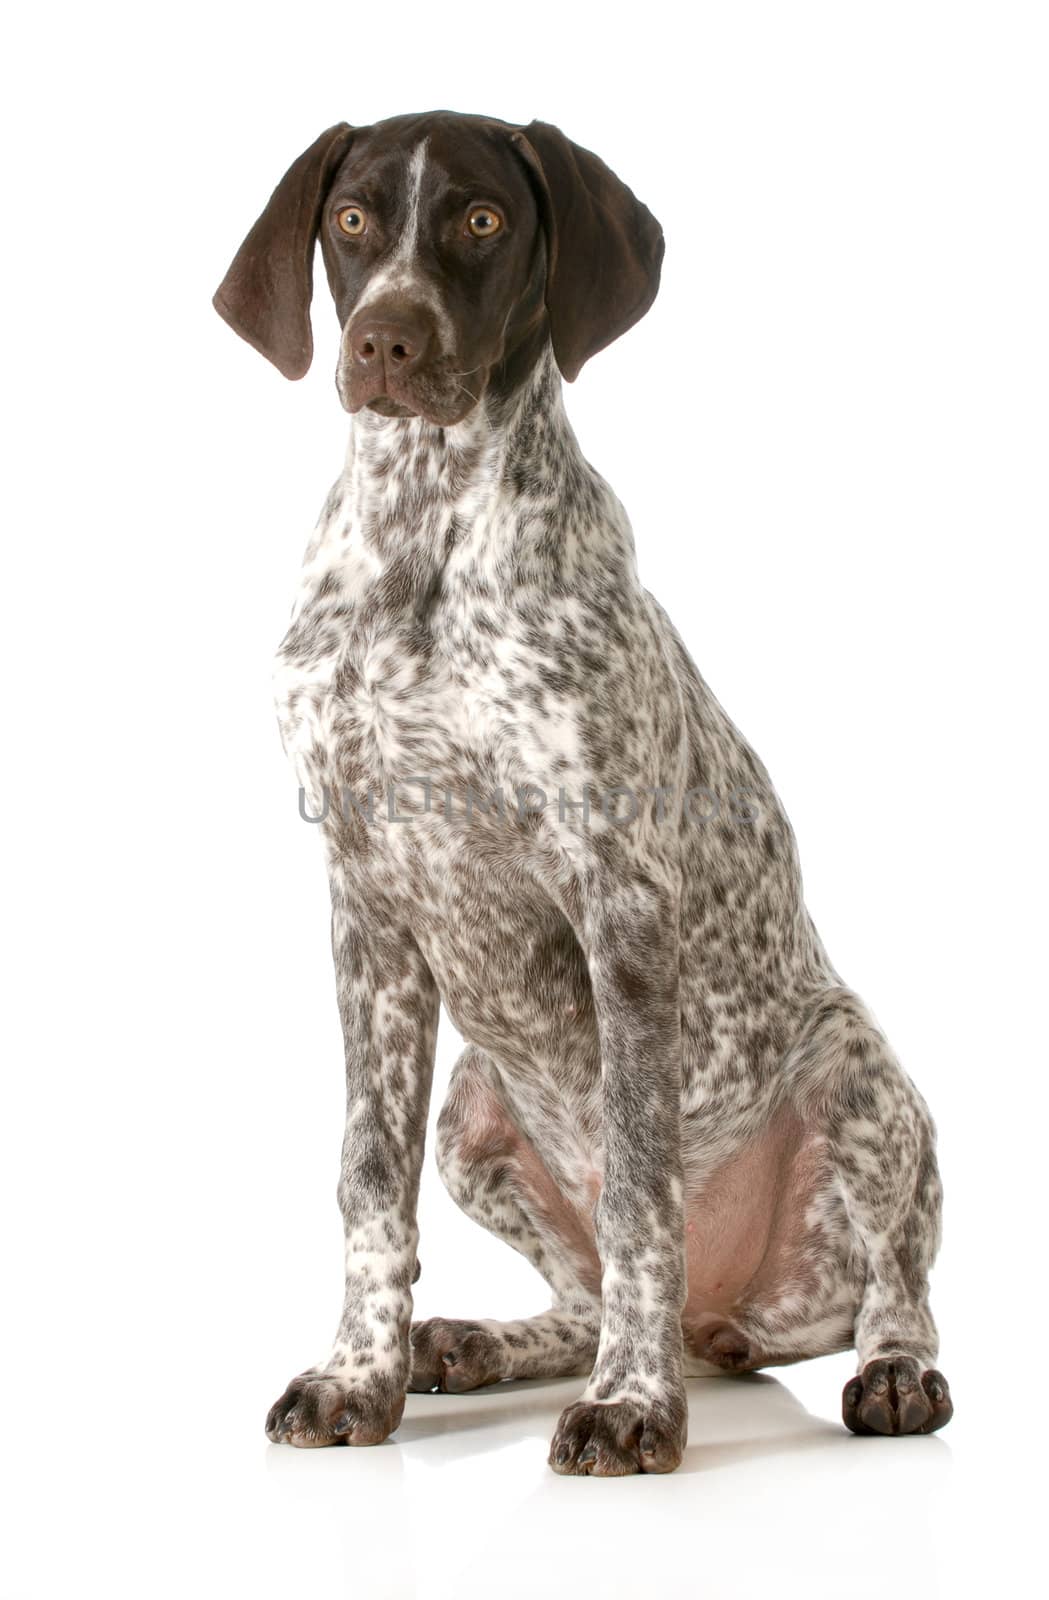 german shorthaired pointer sitting looking at viewer isolated on white background